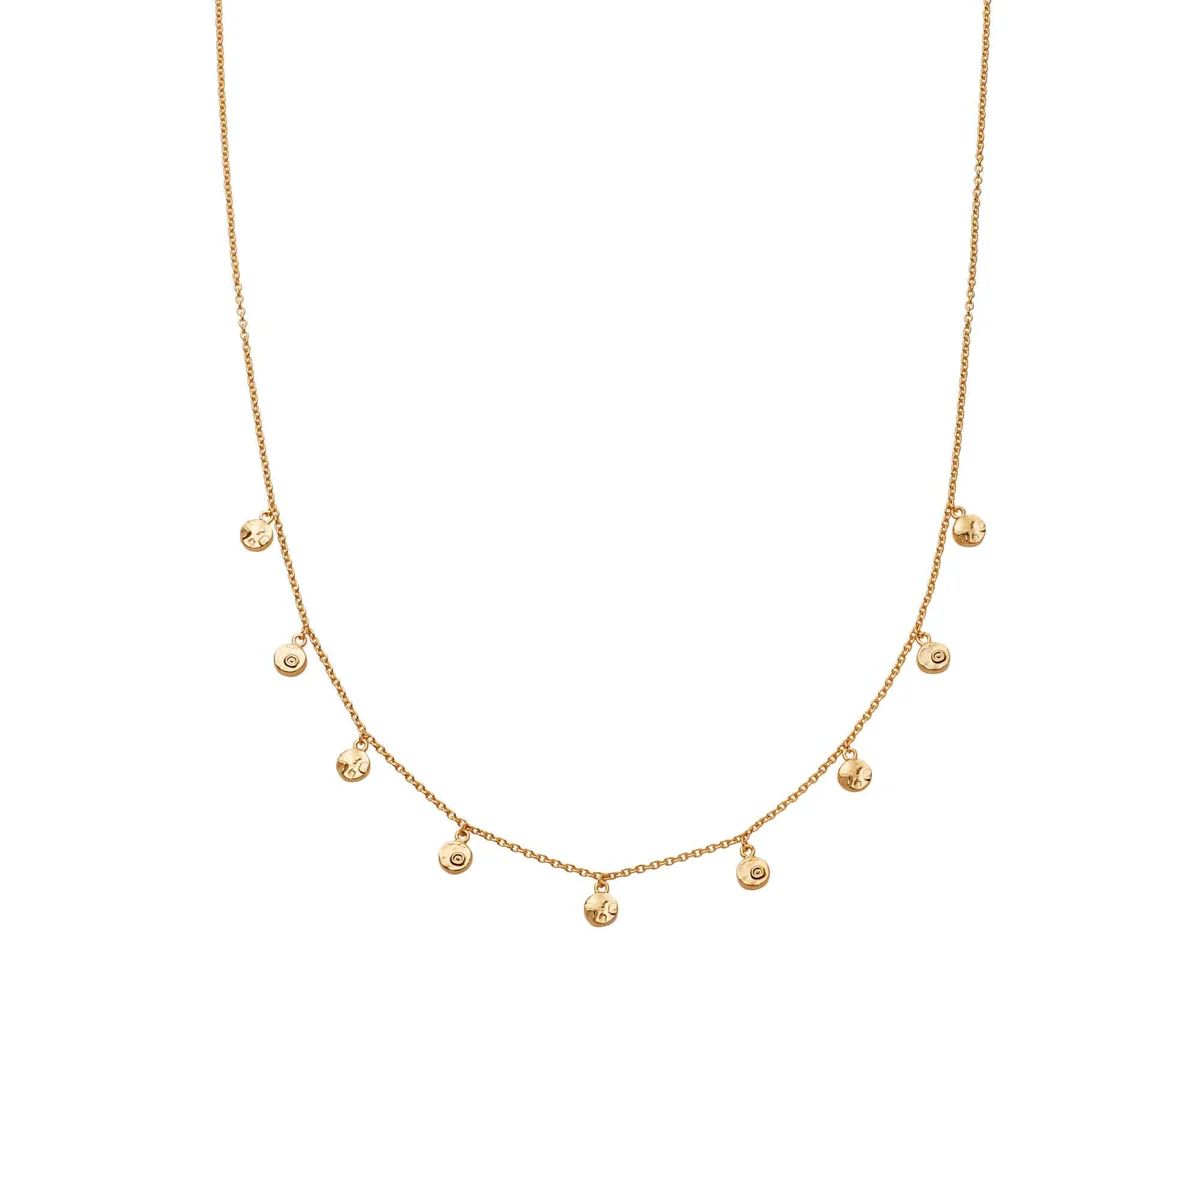 Fossil Charm Necklace 18ct Gold Plate | Daisy London Jewellery